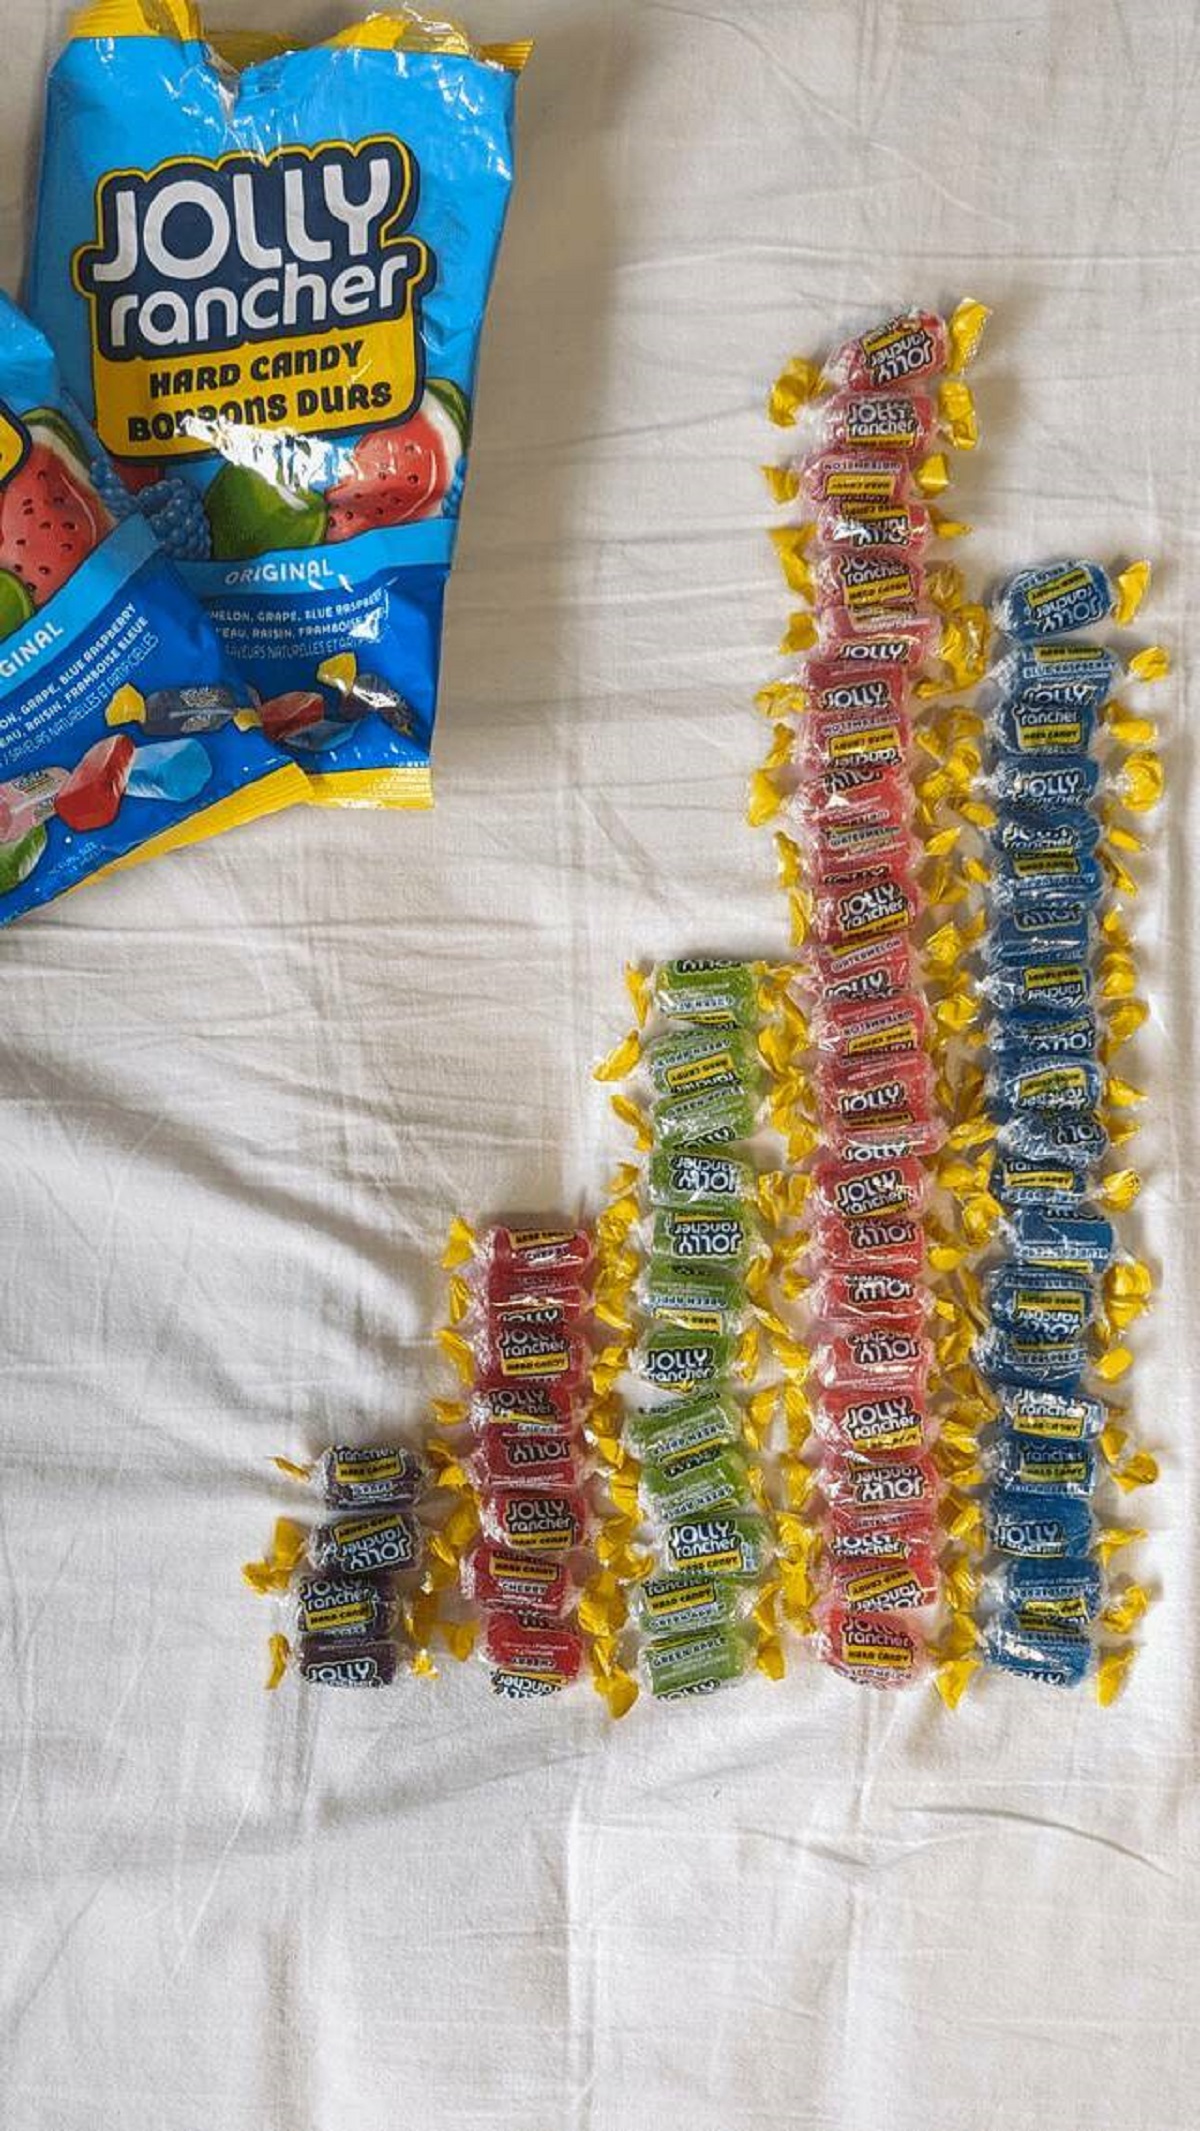 "Uneven distribution of Jolly Ranchers in 2 400g (7oz) bags."